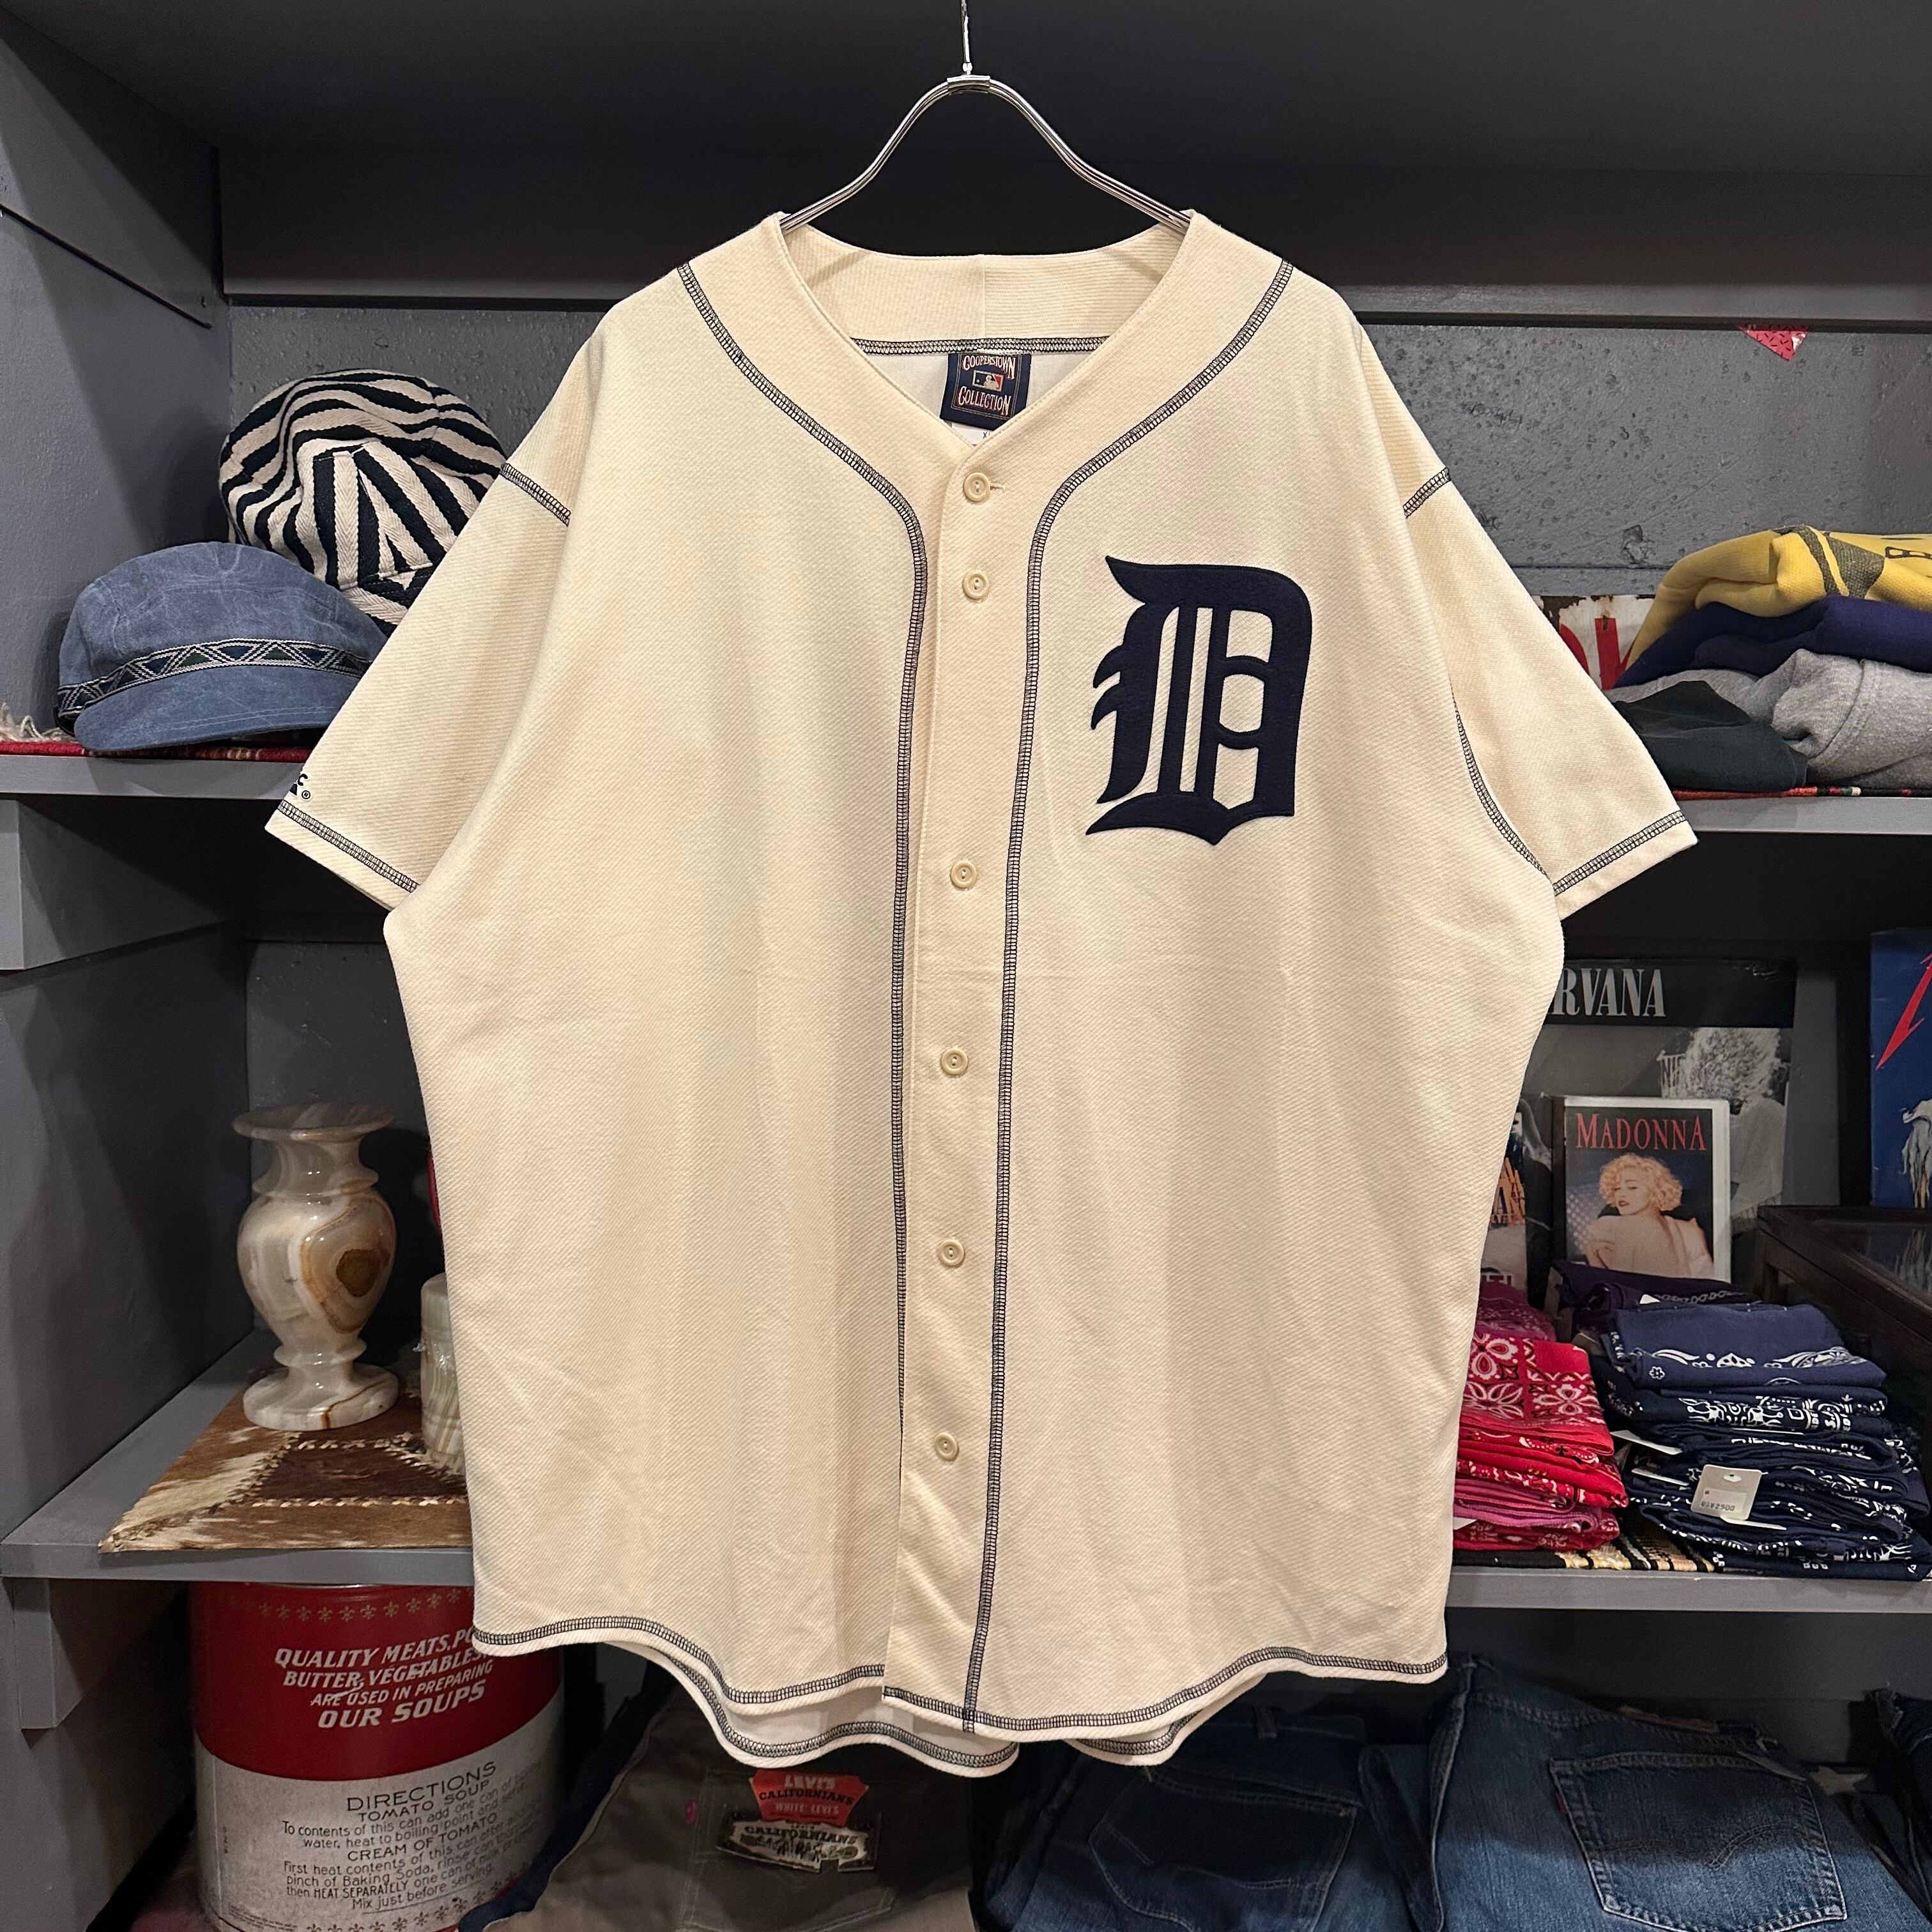 Cooperstown Collection baseball shirt